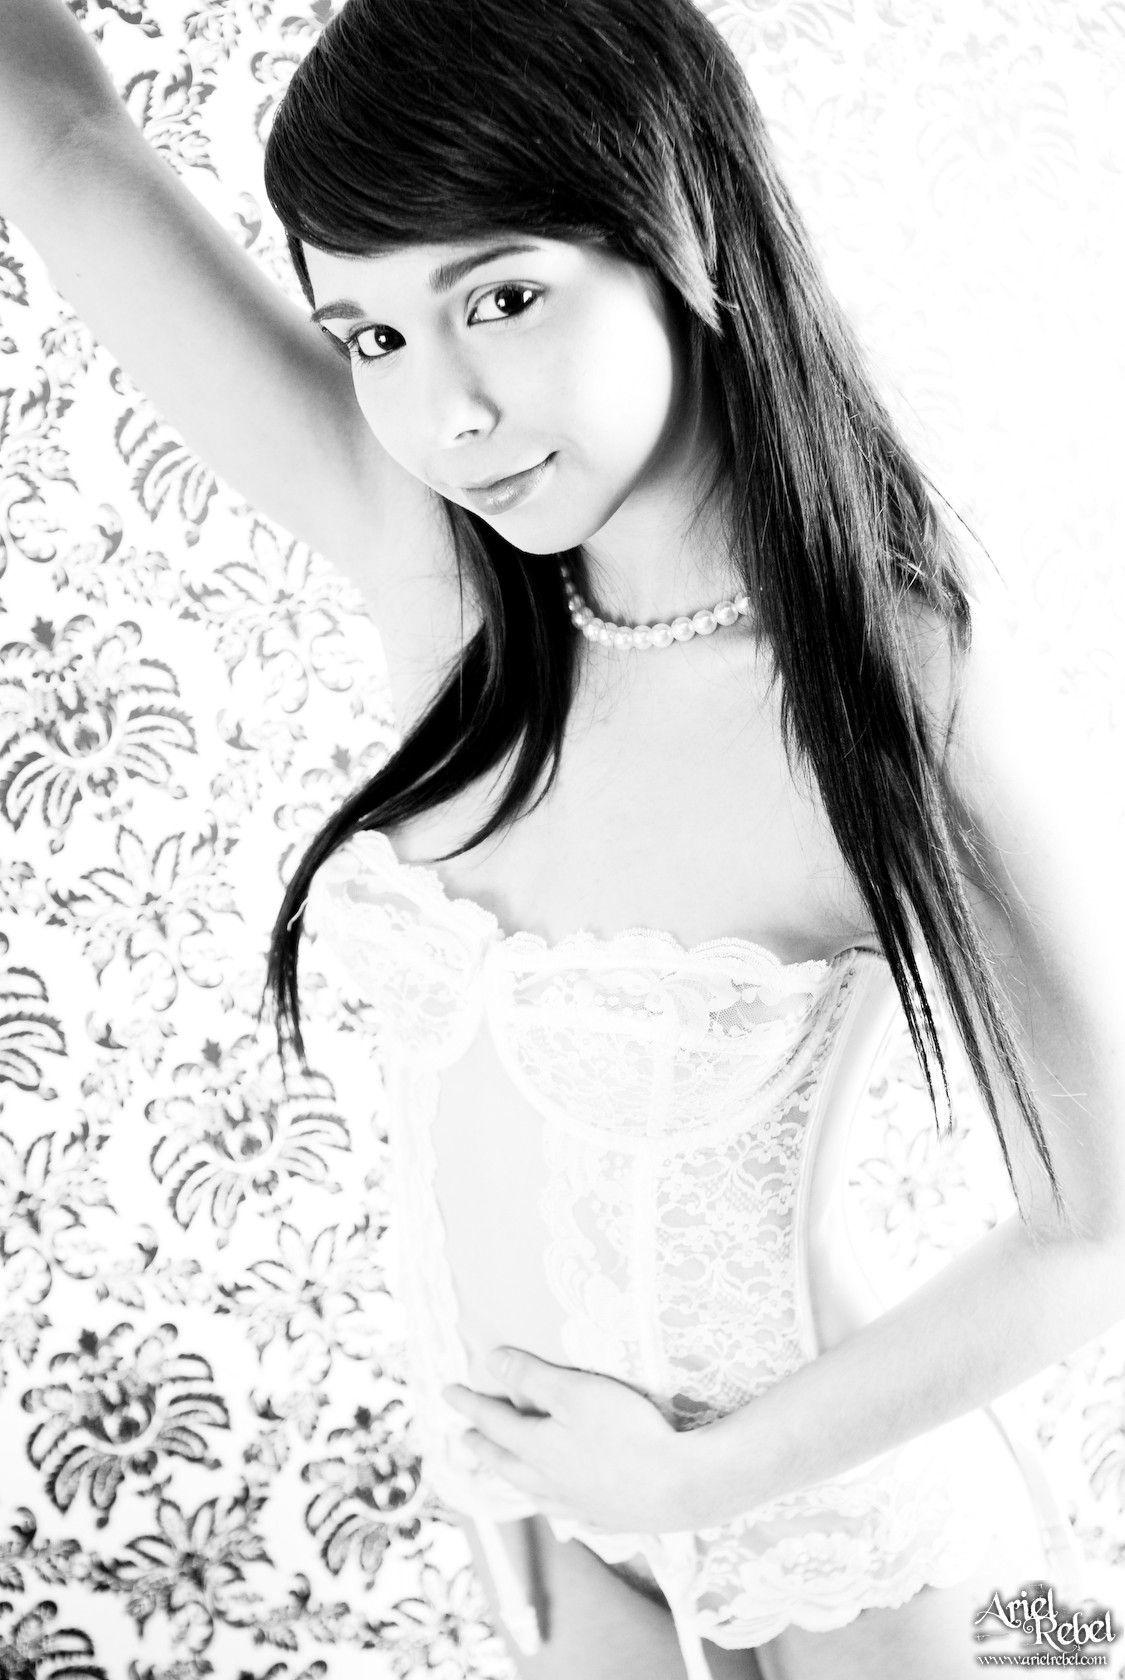 Pictures of Ariel Rebel looking vintage in black and white #53299478